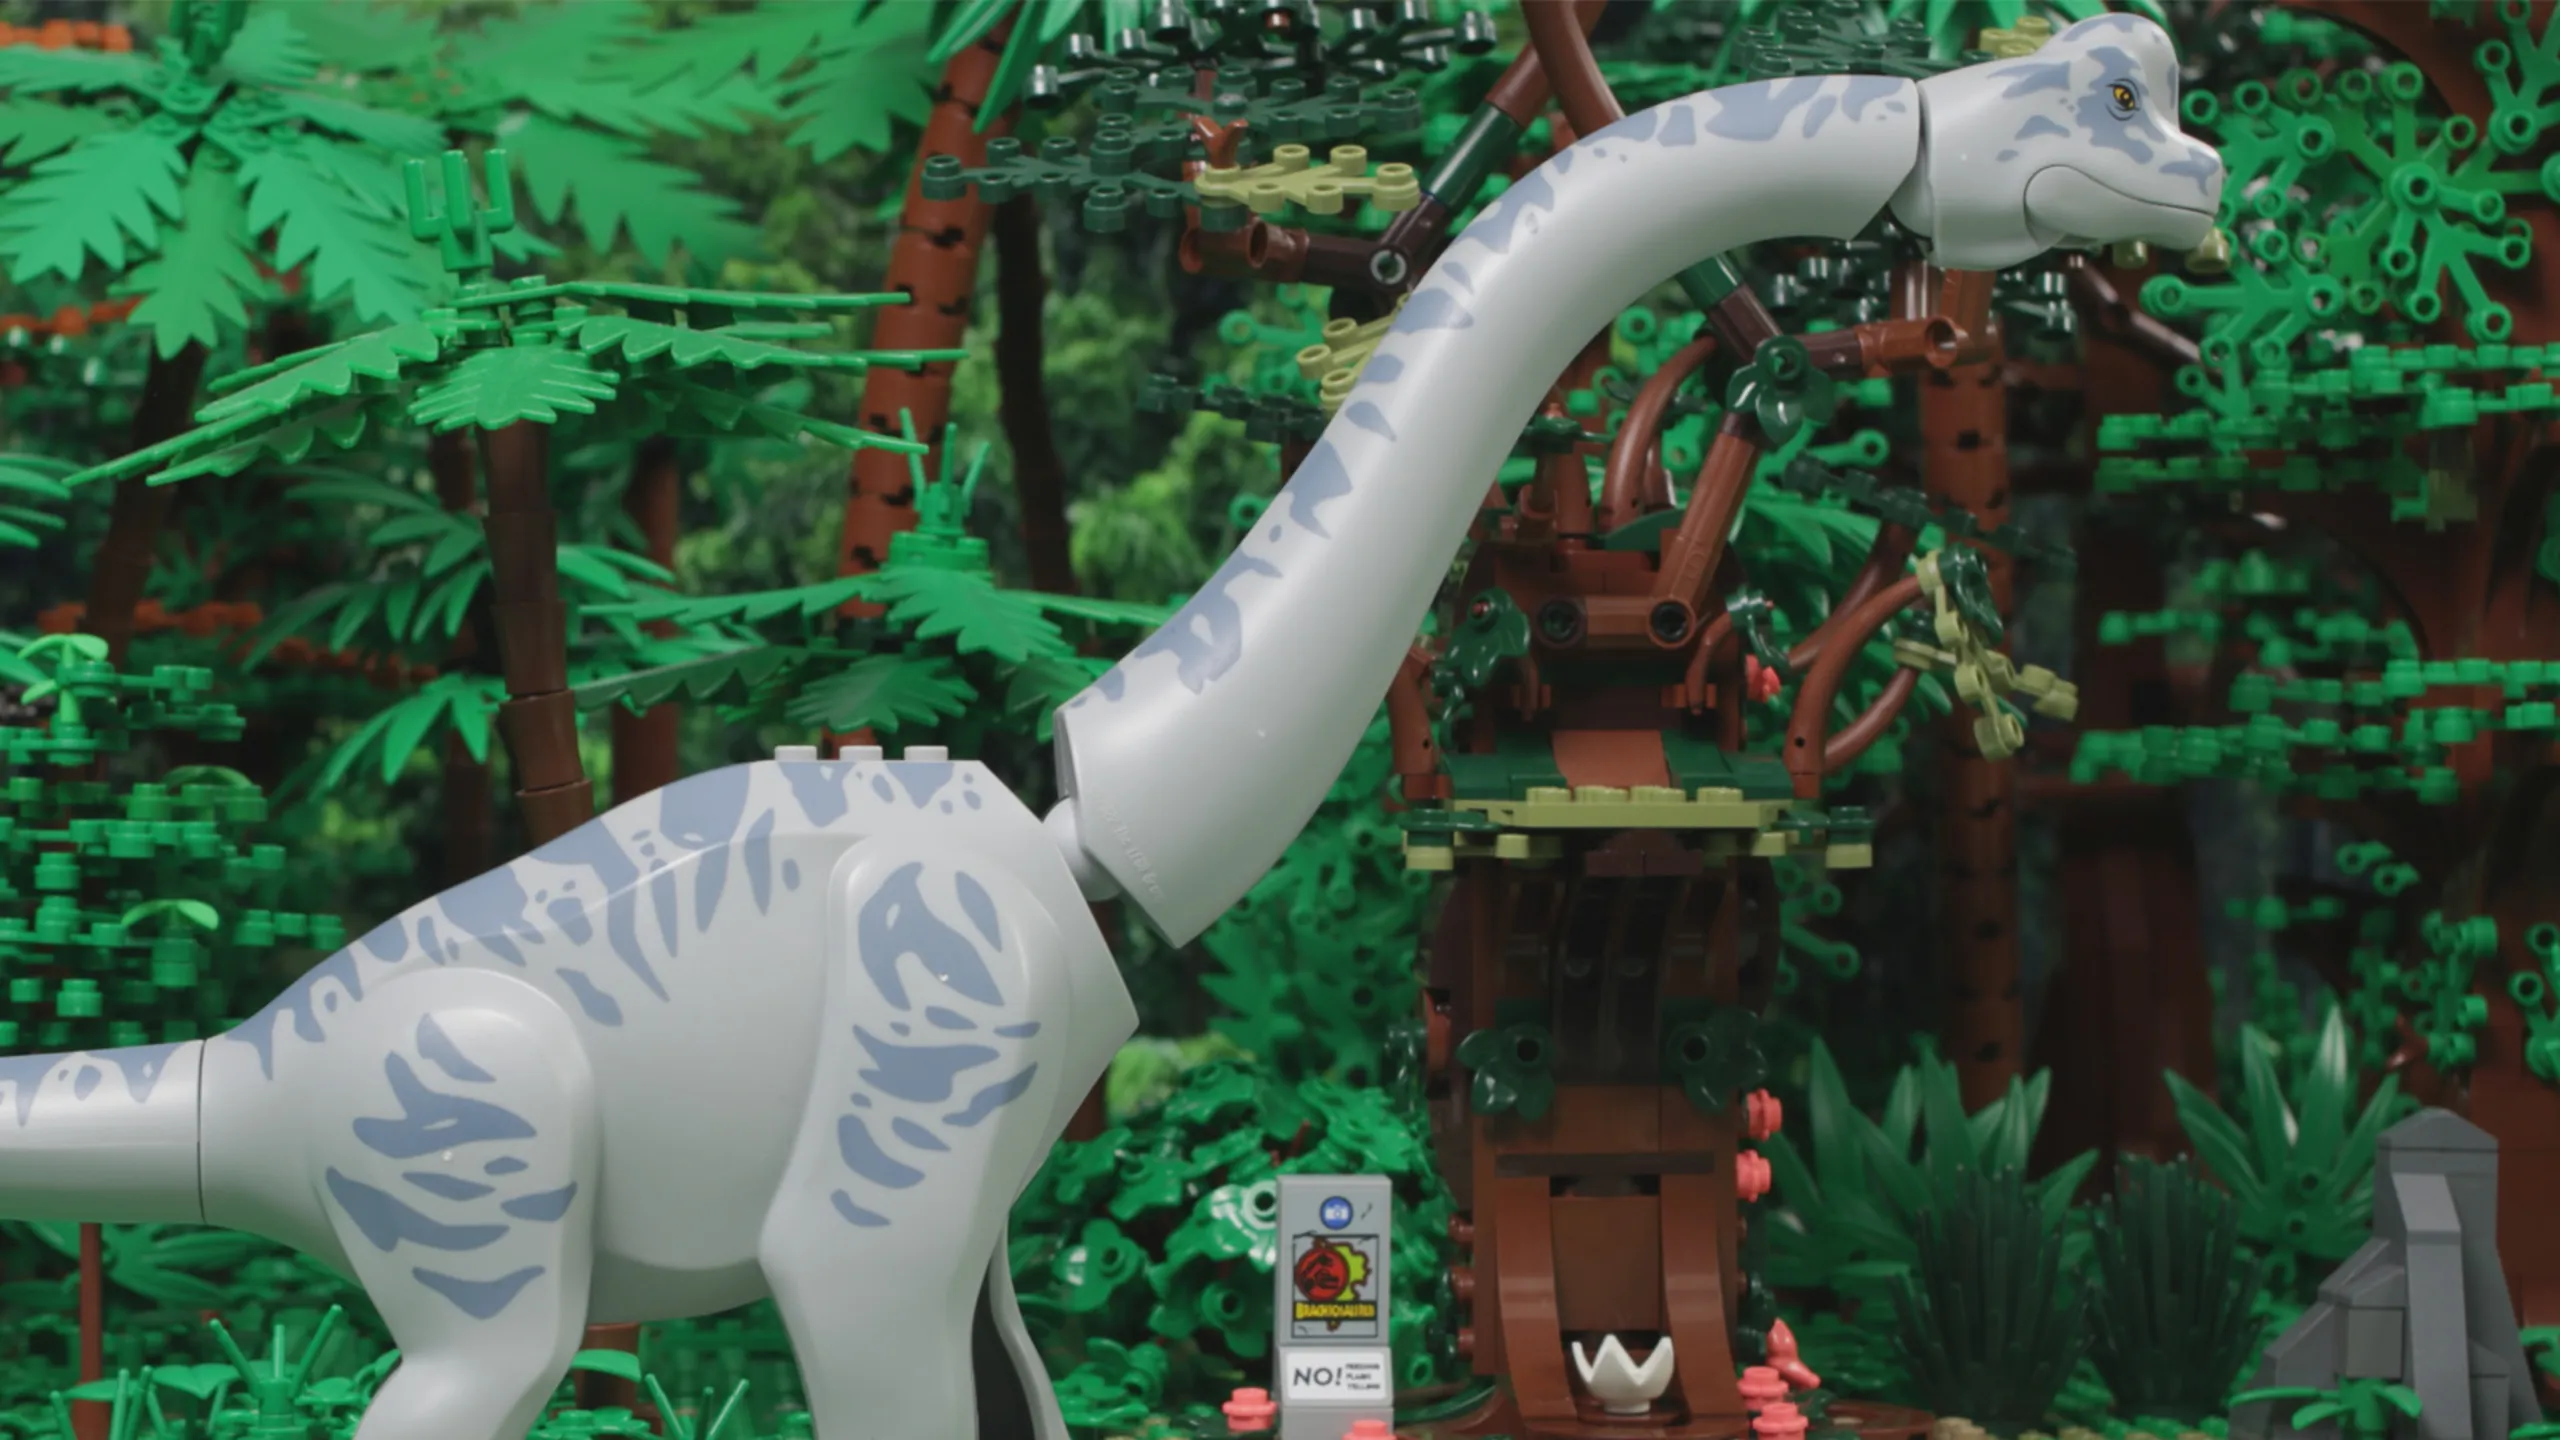 The LEGO Group and Universal Add Seven New Sets to the Jurassic World Line  Up - aNb Media, Inc.